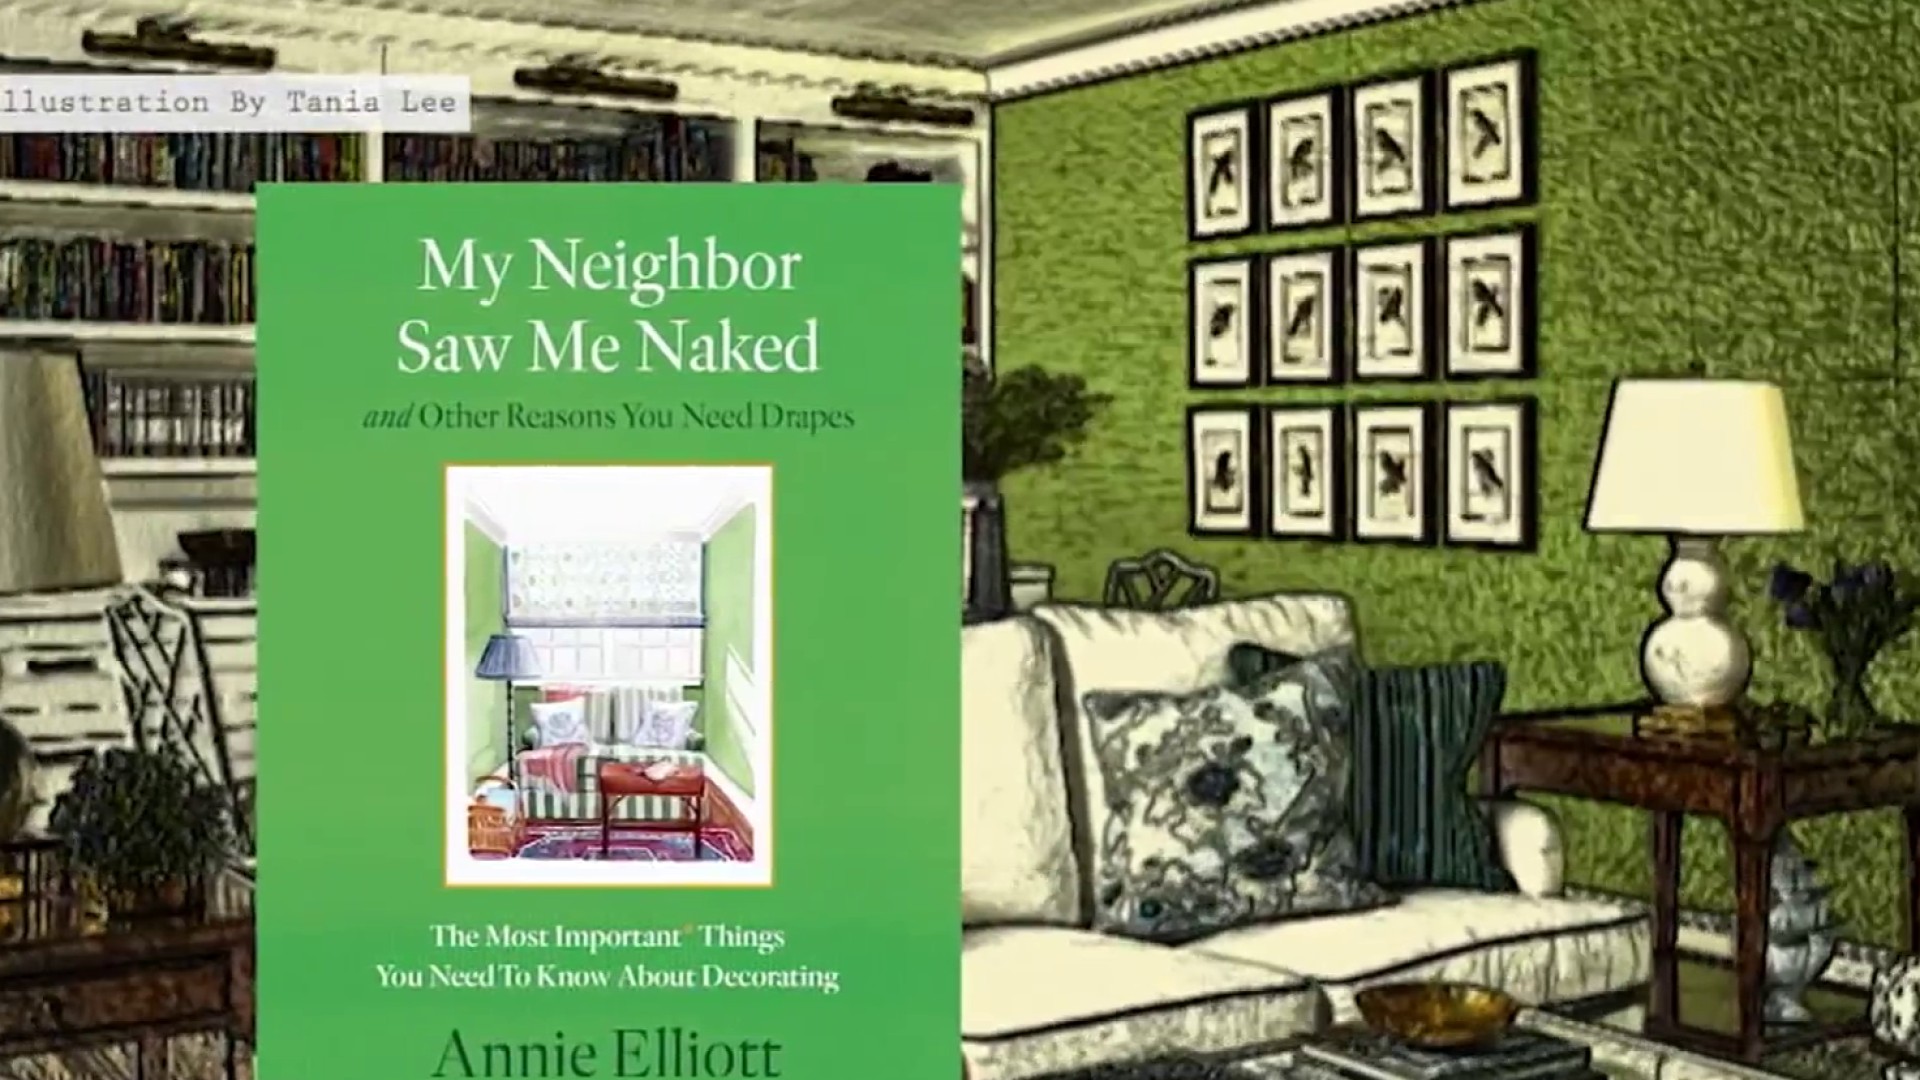 debbie lisa martin recommends neighbor strips for me pic